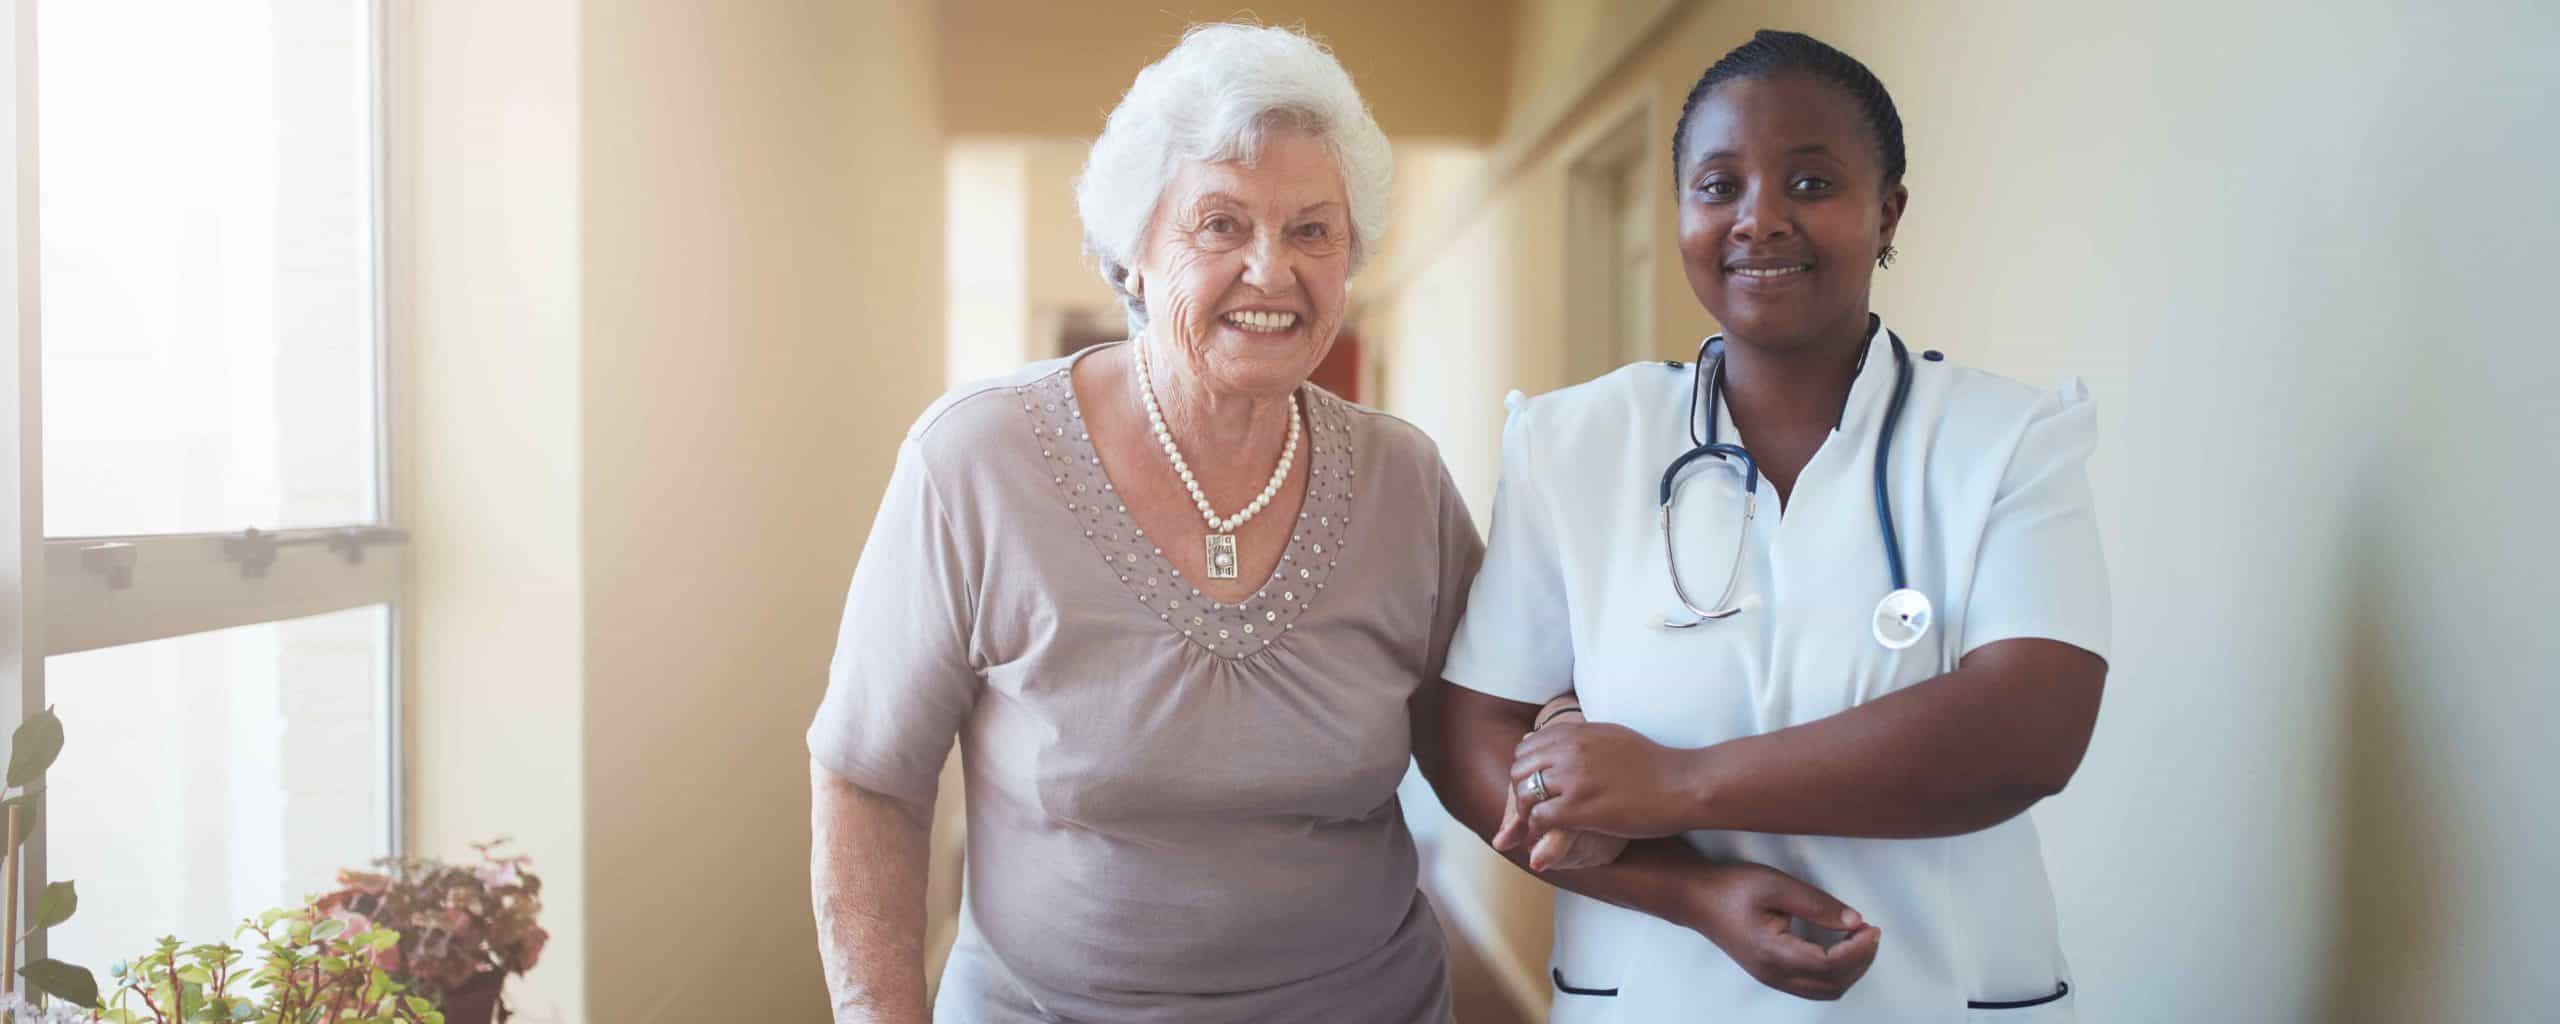 Nurse and patient walking down a hall holding arms